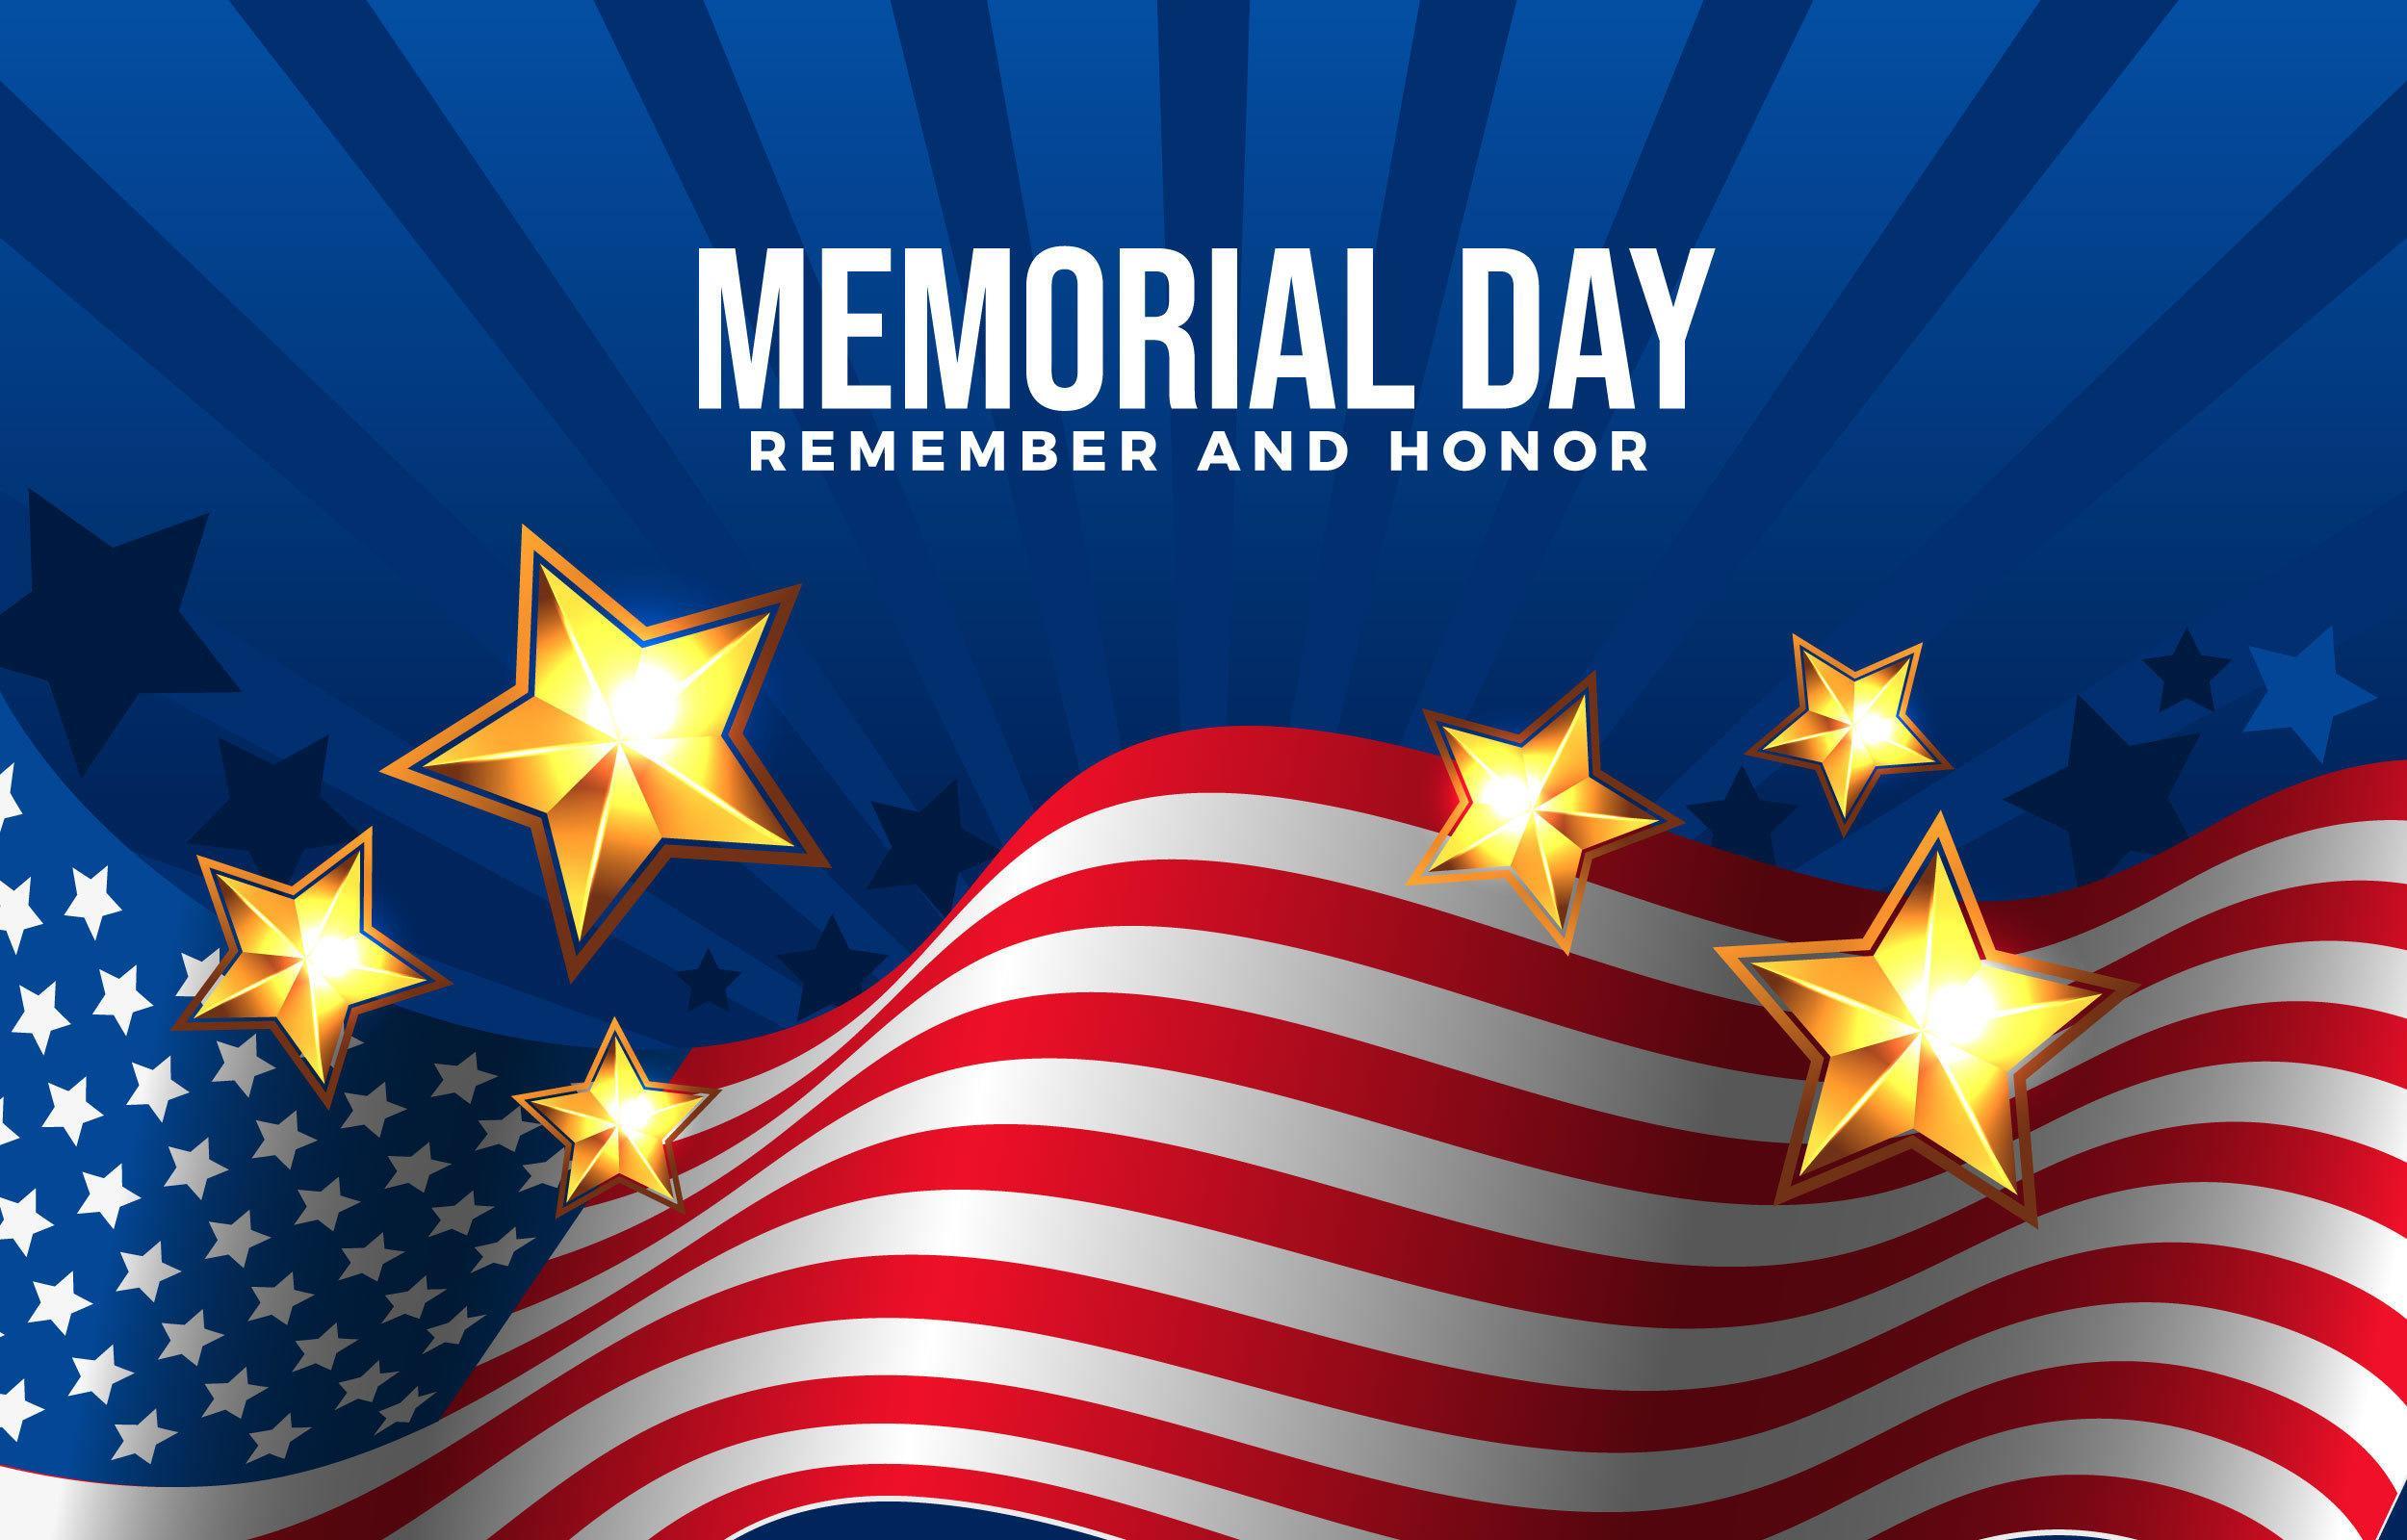 Honoring Our Heroes Sacrifices During Memorial Day 2196143 Vector Art